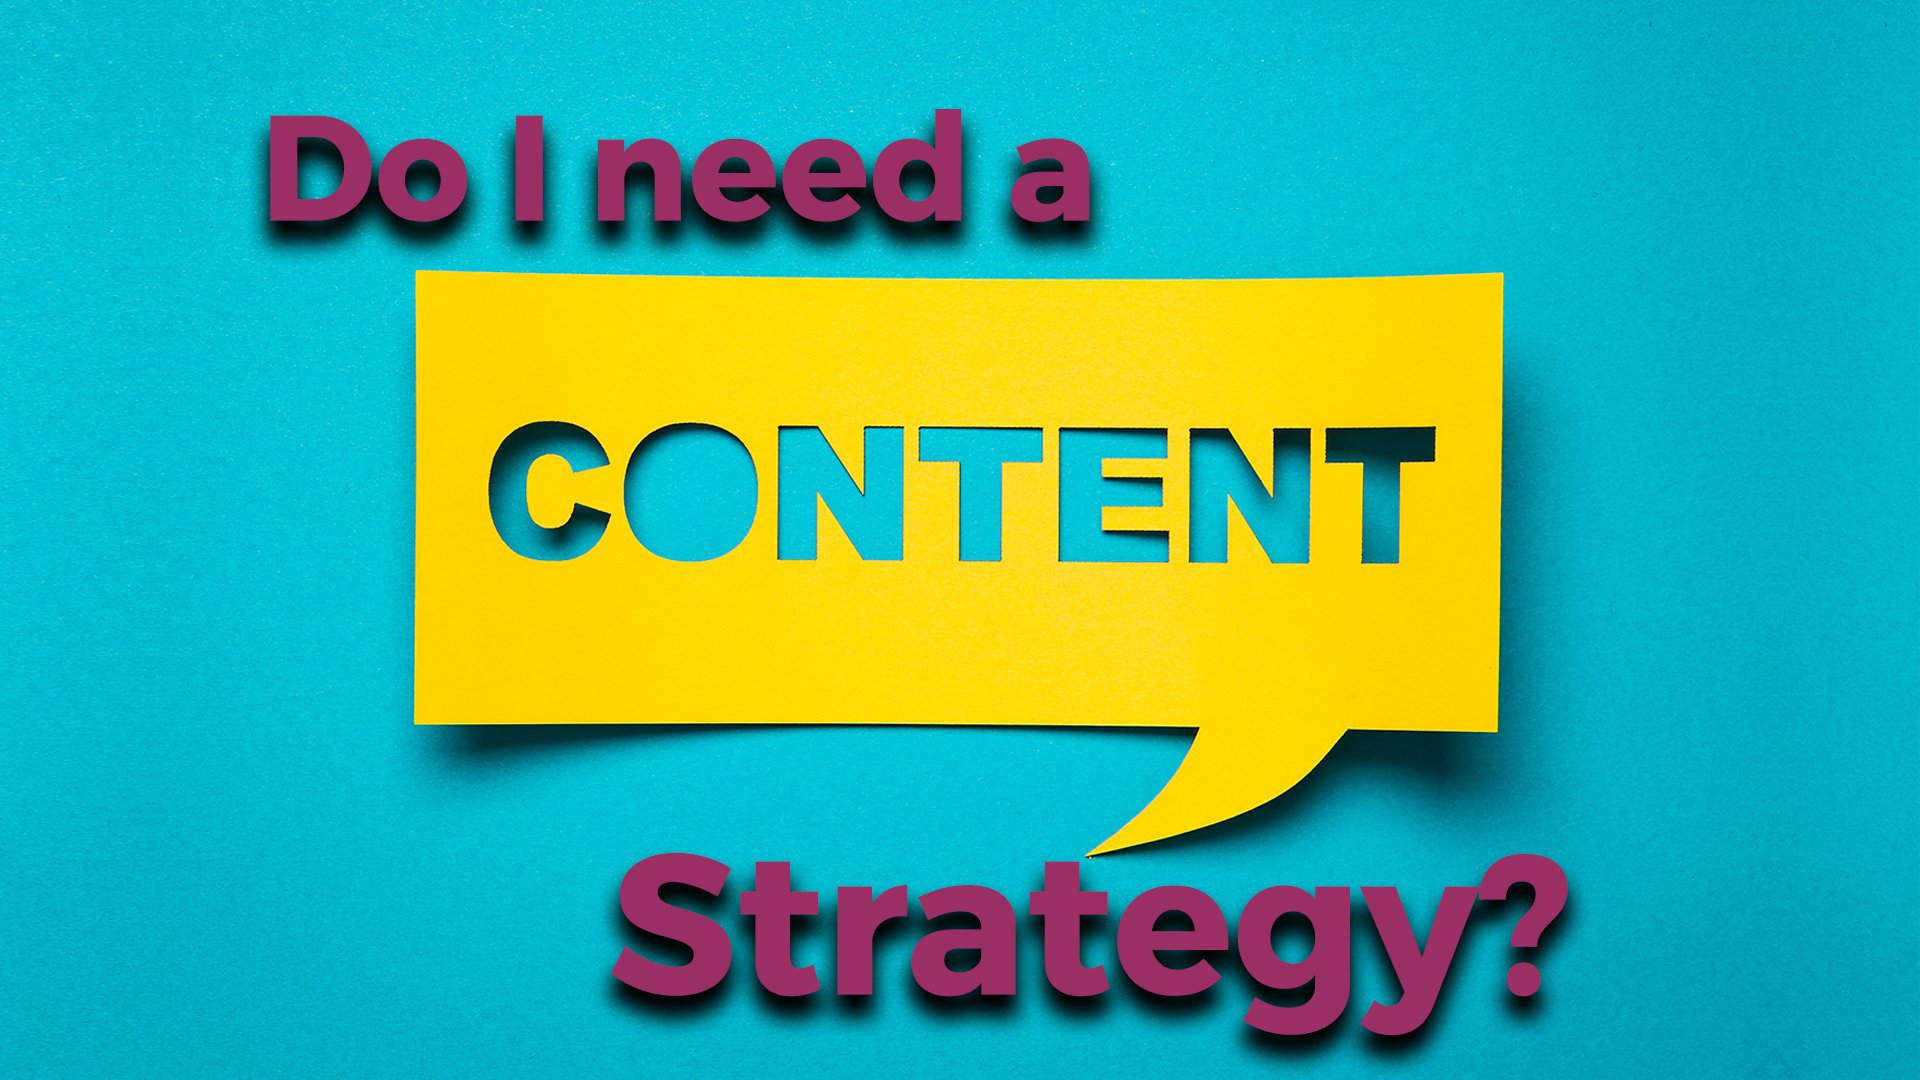 Do I need a content strategy?